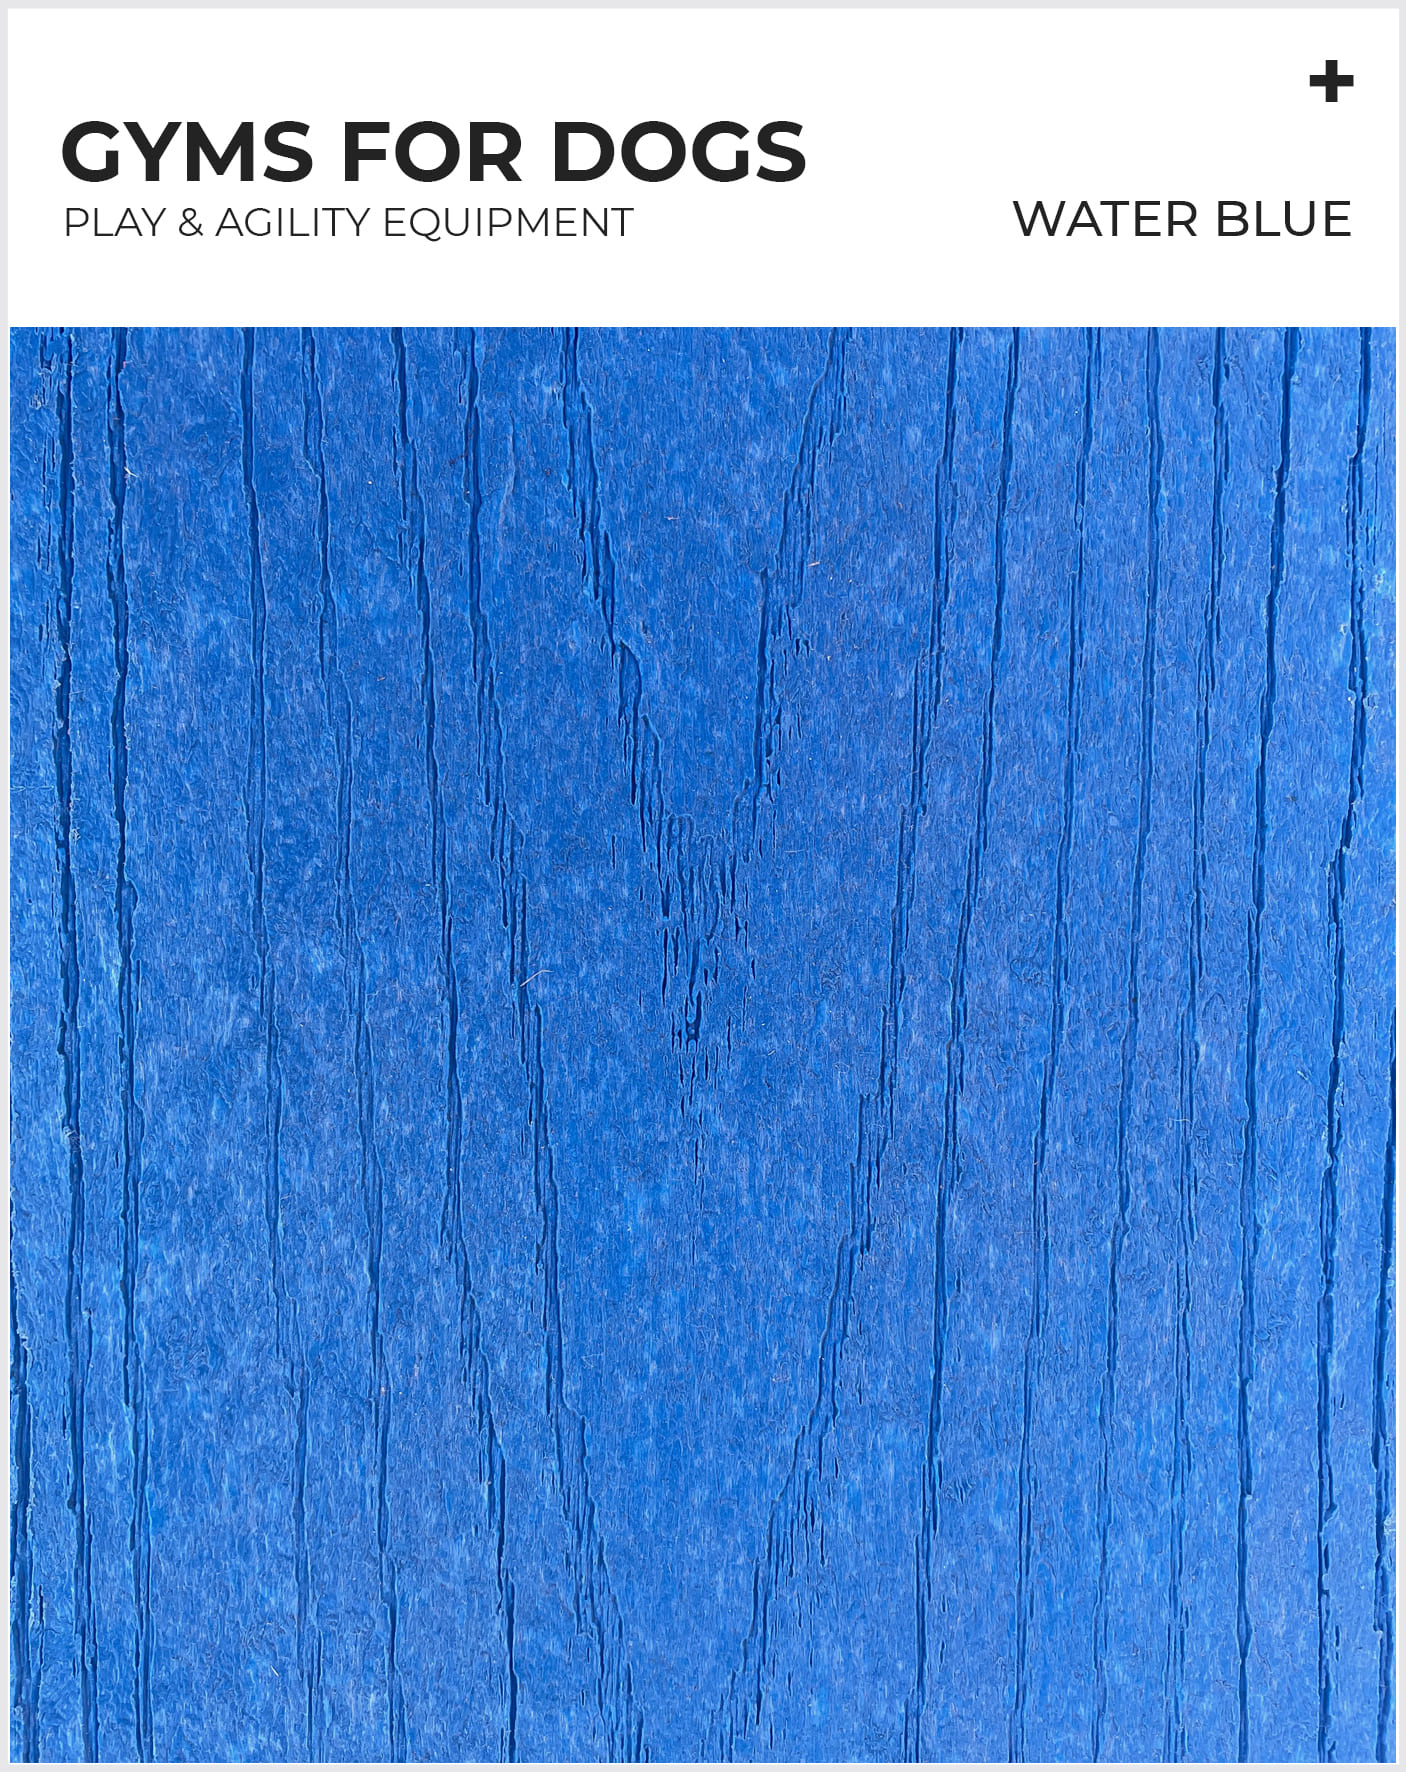 Dog Park Equipment Agility Products - Water Blue